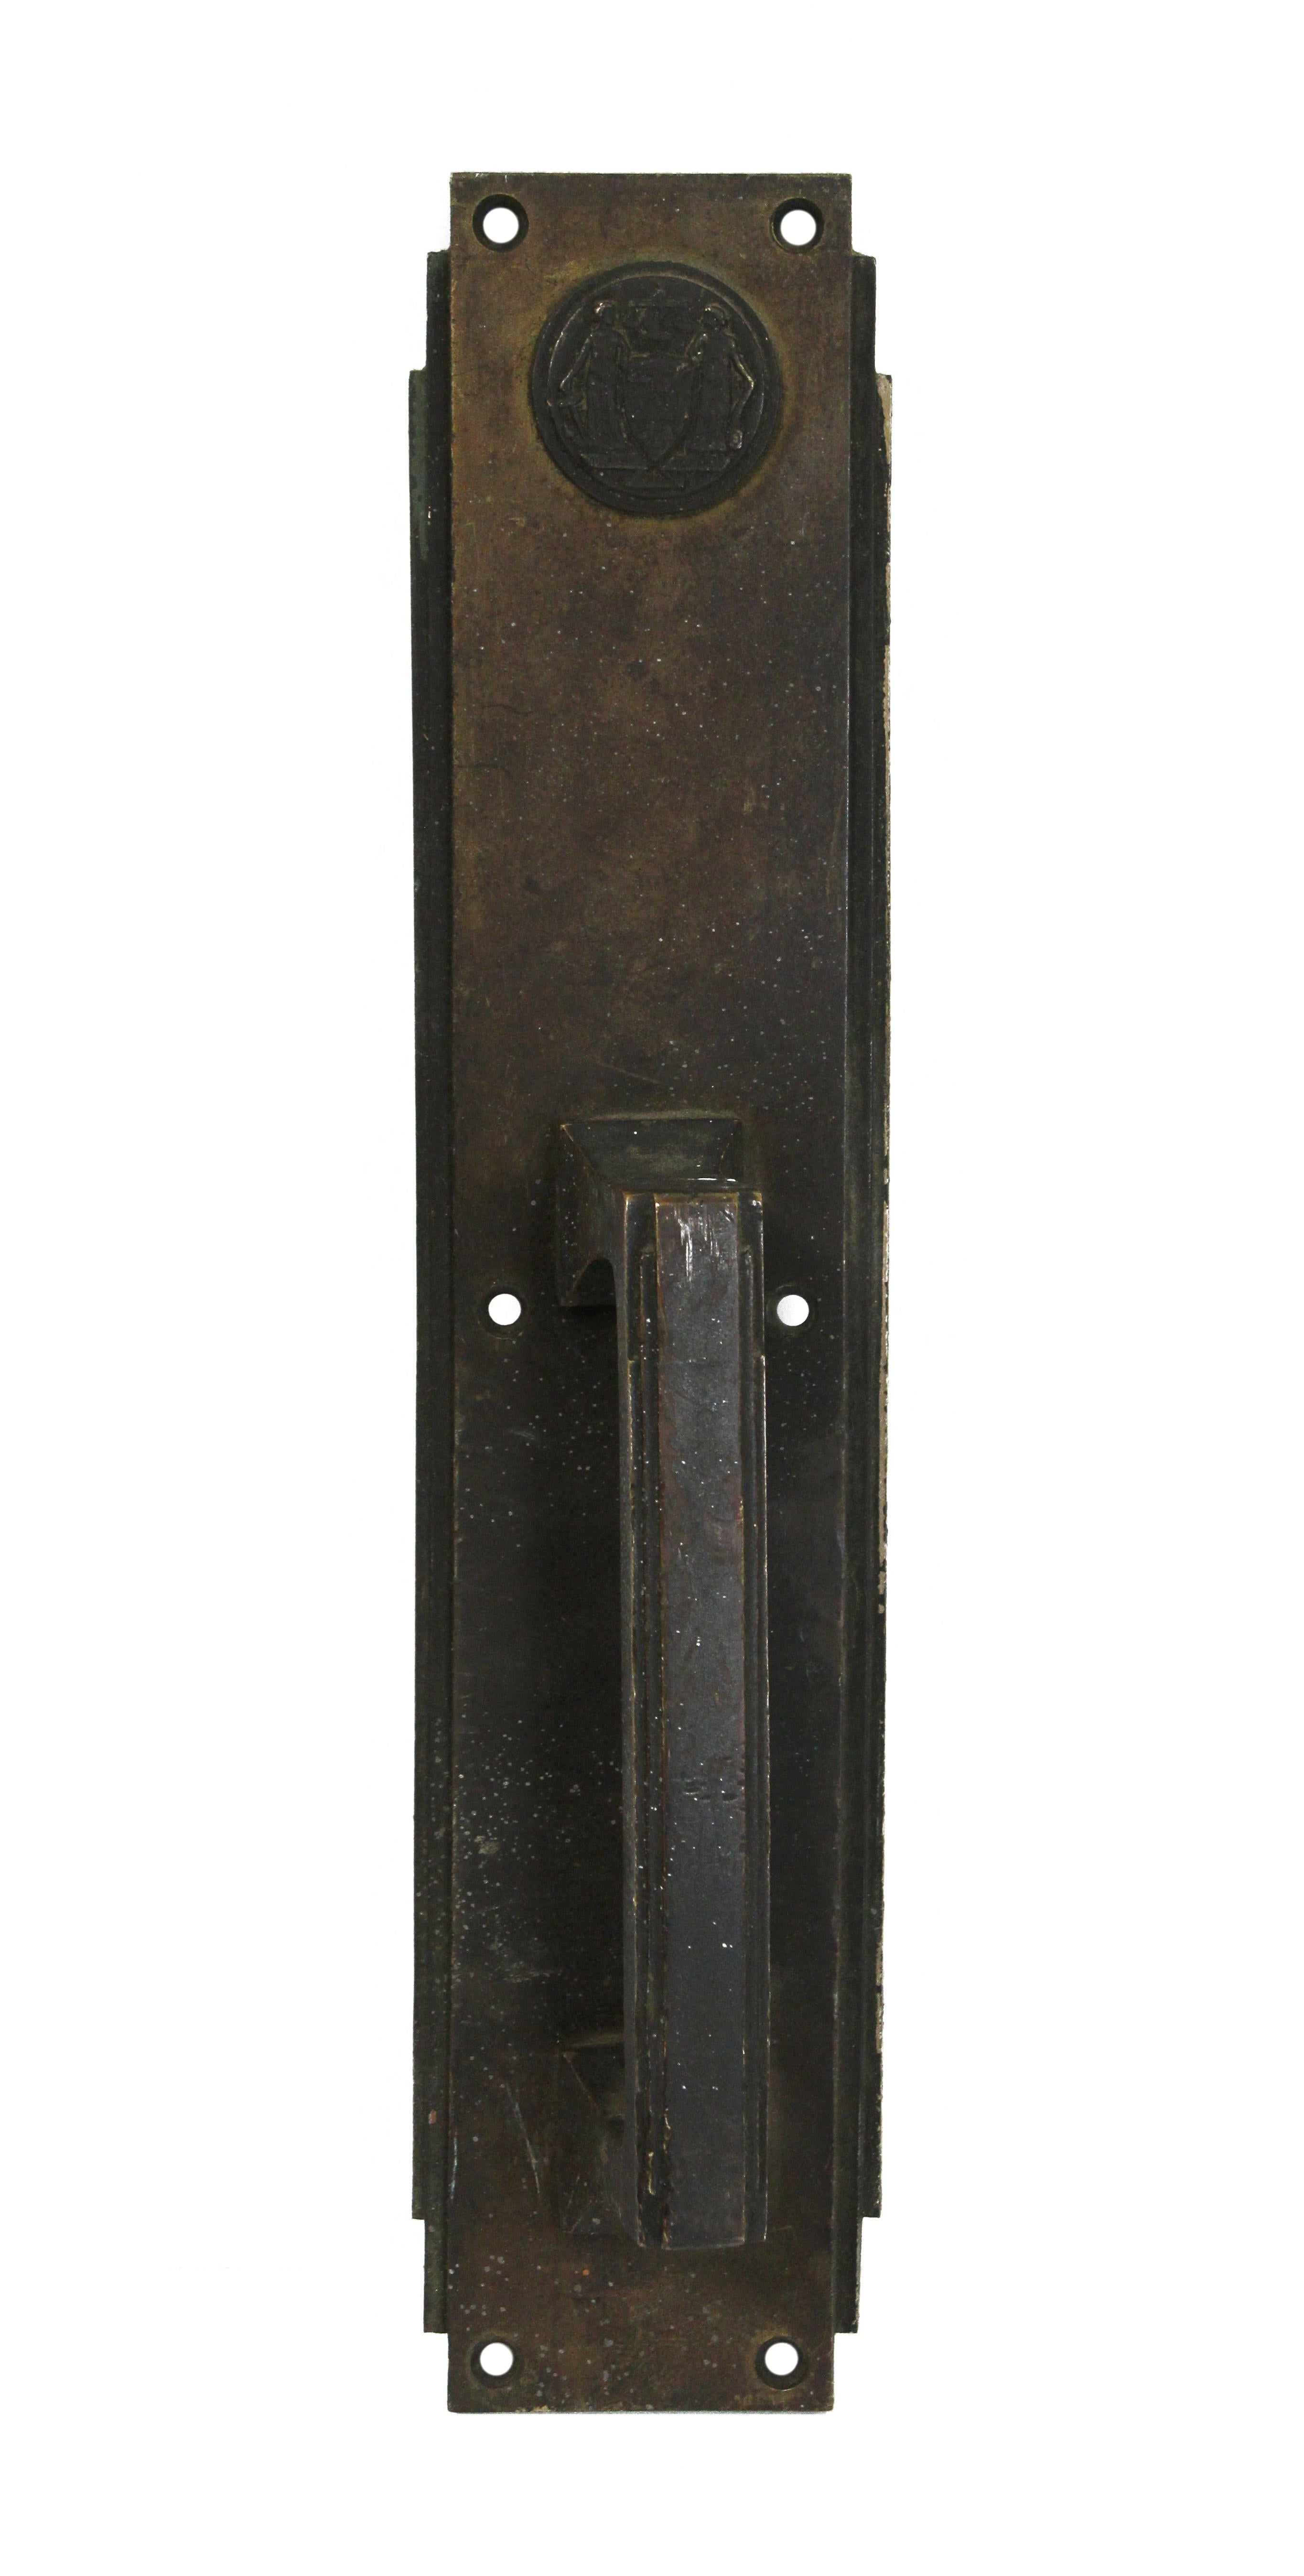 1931 Corbin signed bronze door pull and push plate set with emblems and a dark patina salvaged from the Philadelphia Civic Center. This pair is made for the front and back of one swinging door. Salvaged by Olde Good Things from The Philadelphia